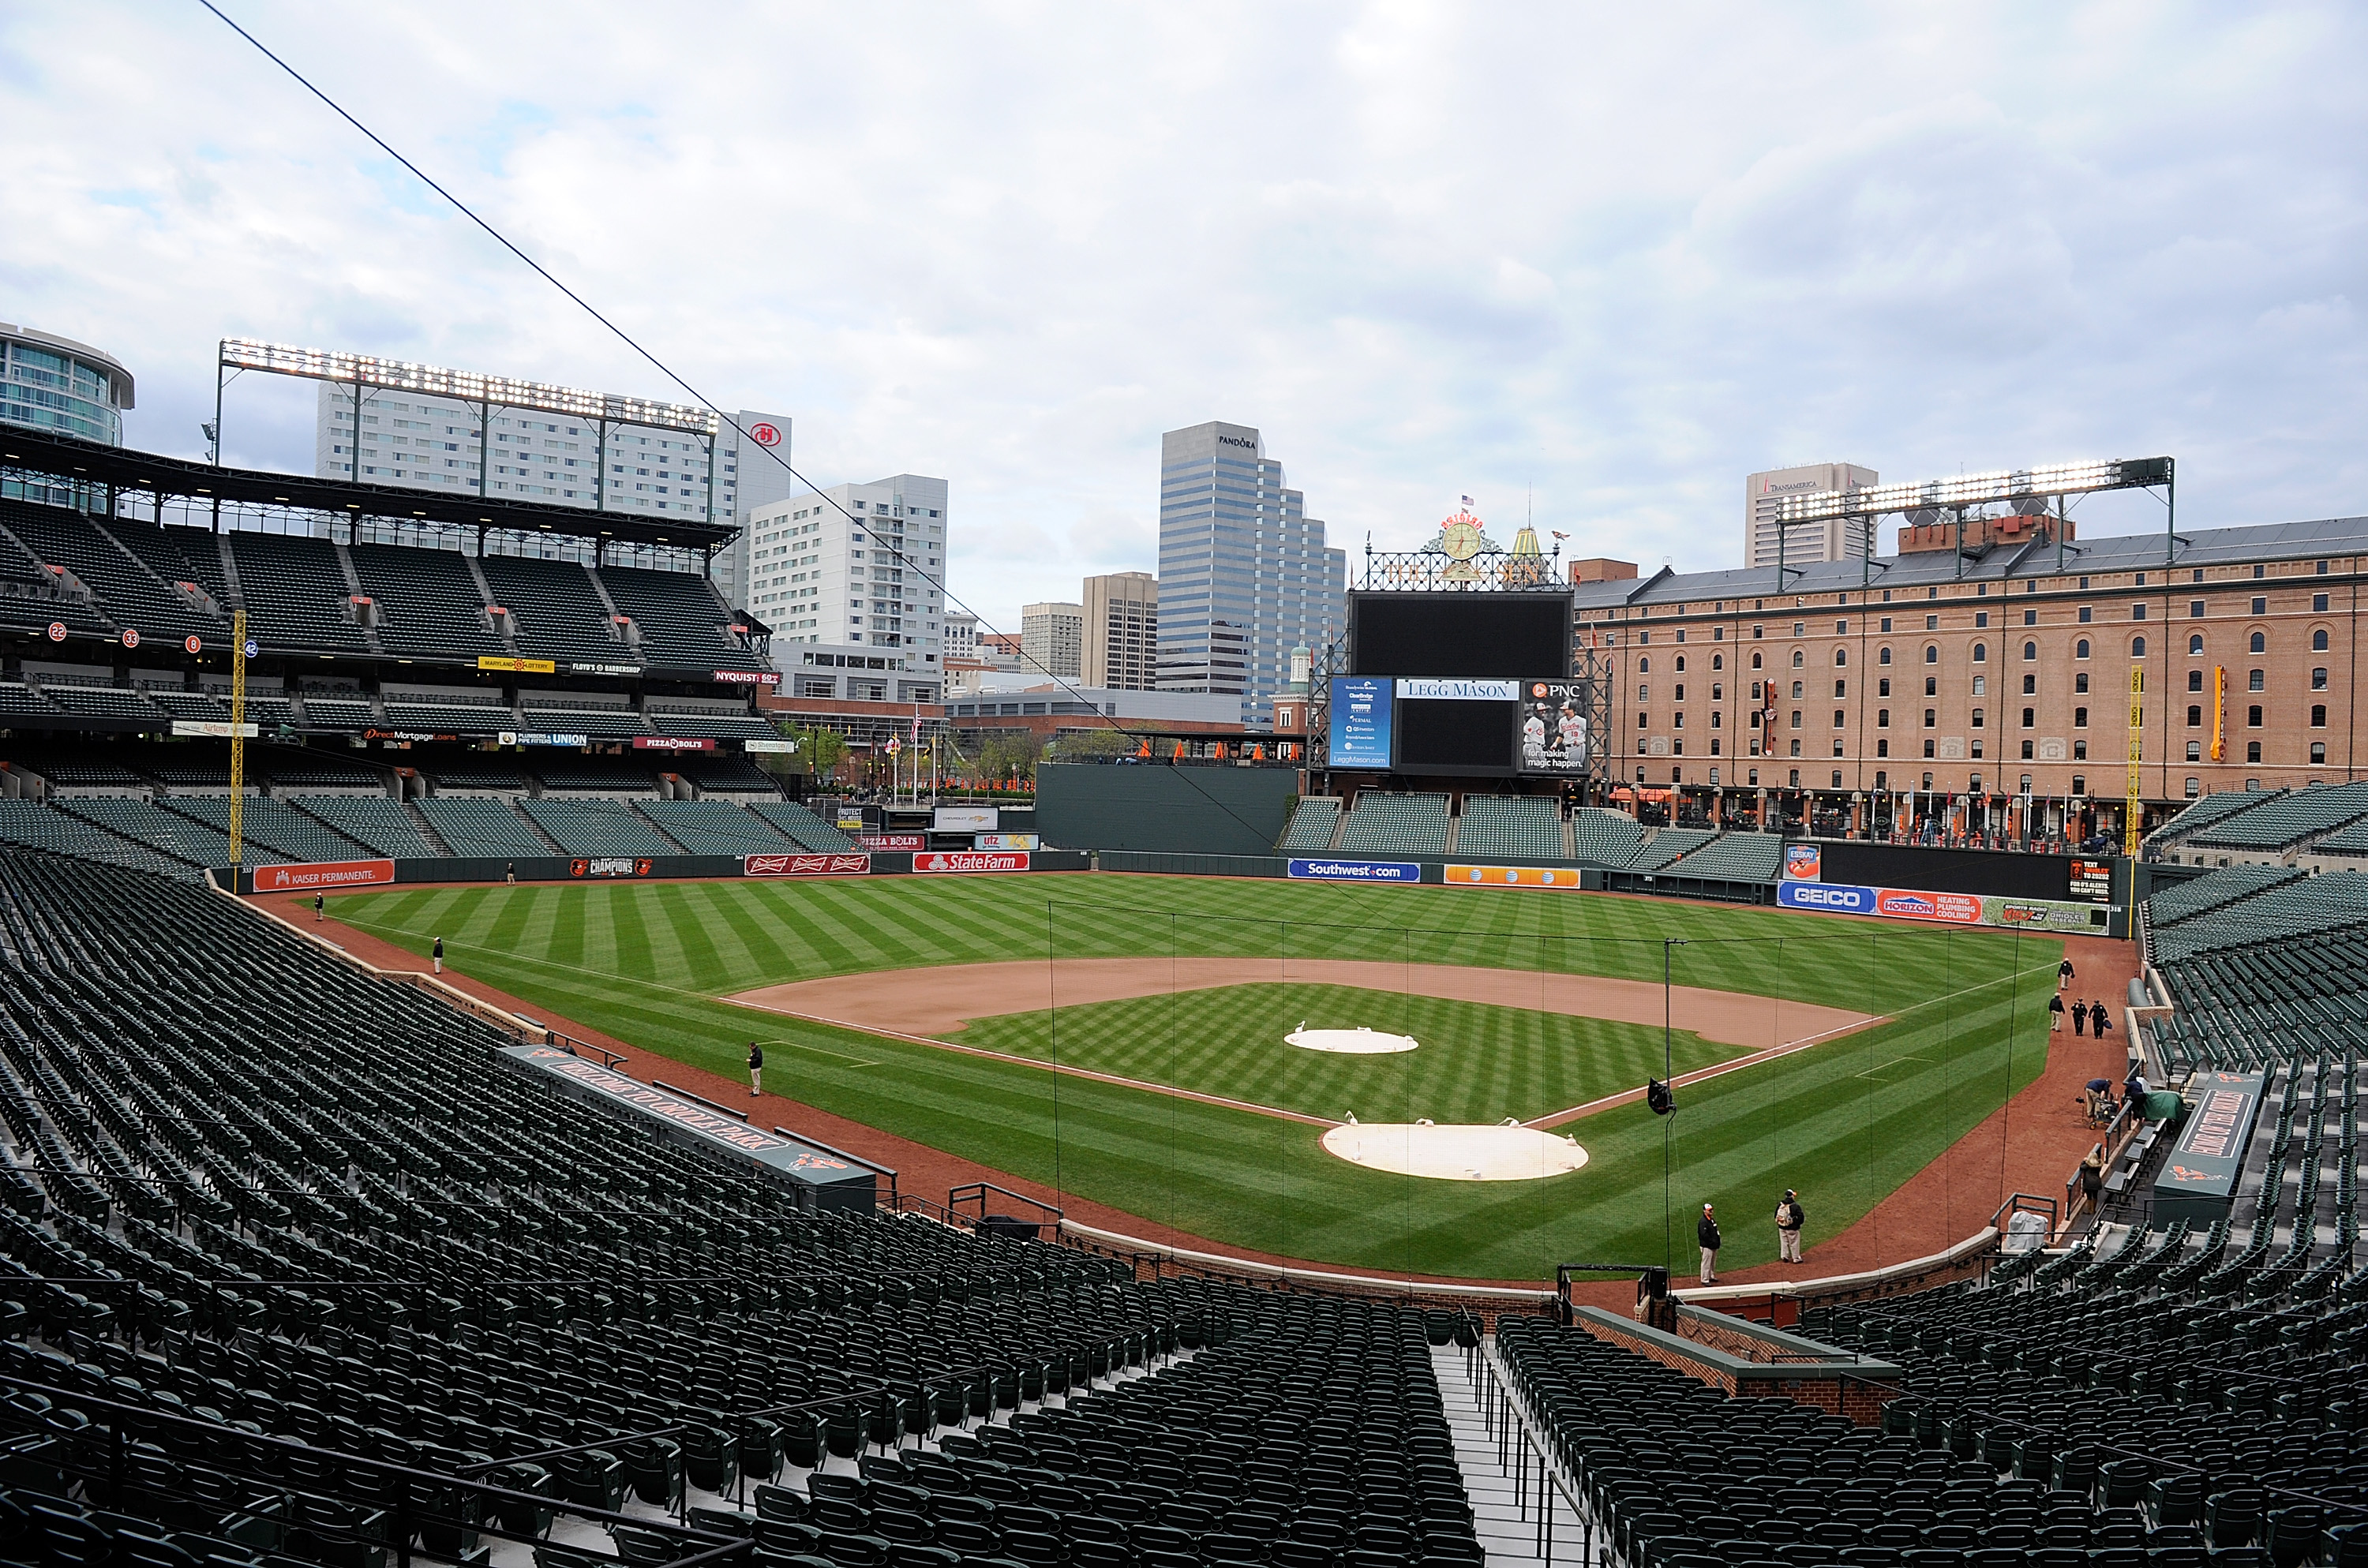 Home Field: Oriole Park At Camden Yards, Baltimore, MD